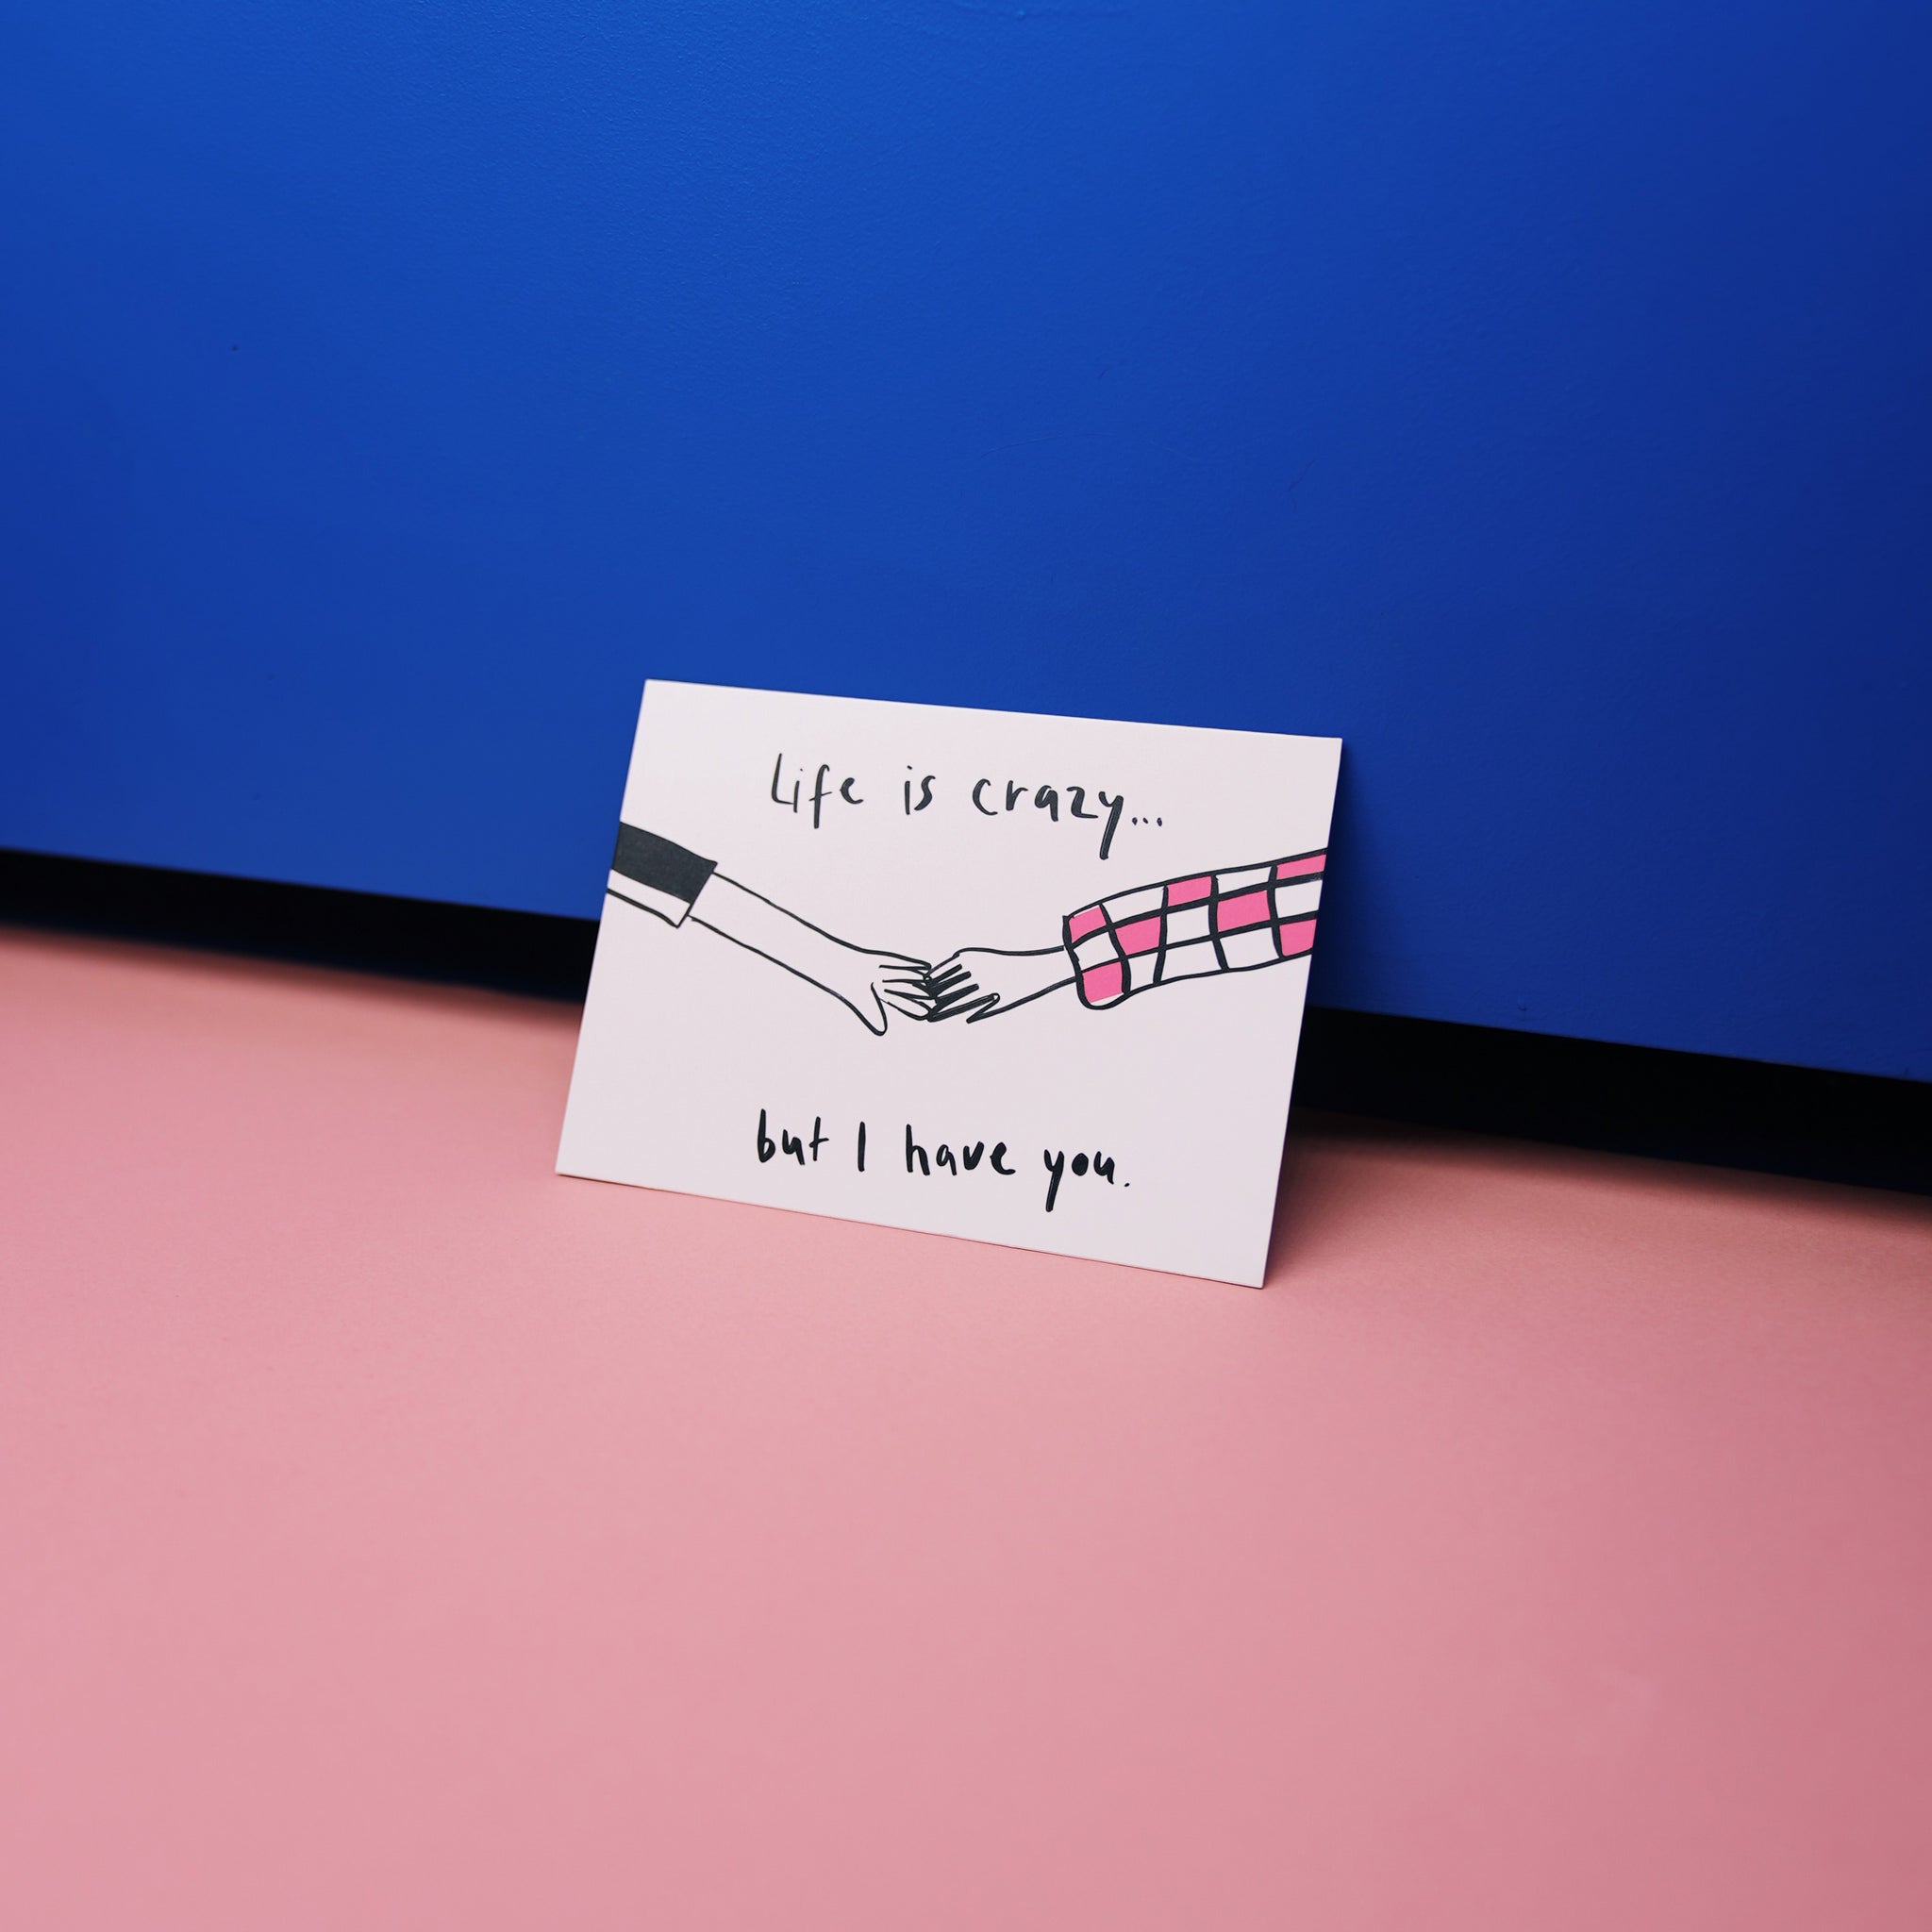 esistfreitag-Postkarte: Life is crazy but I have you